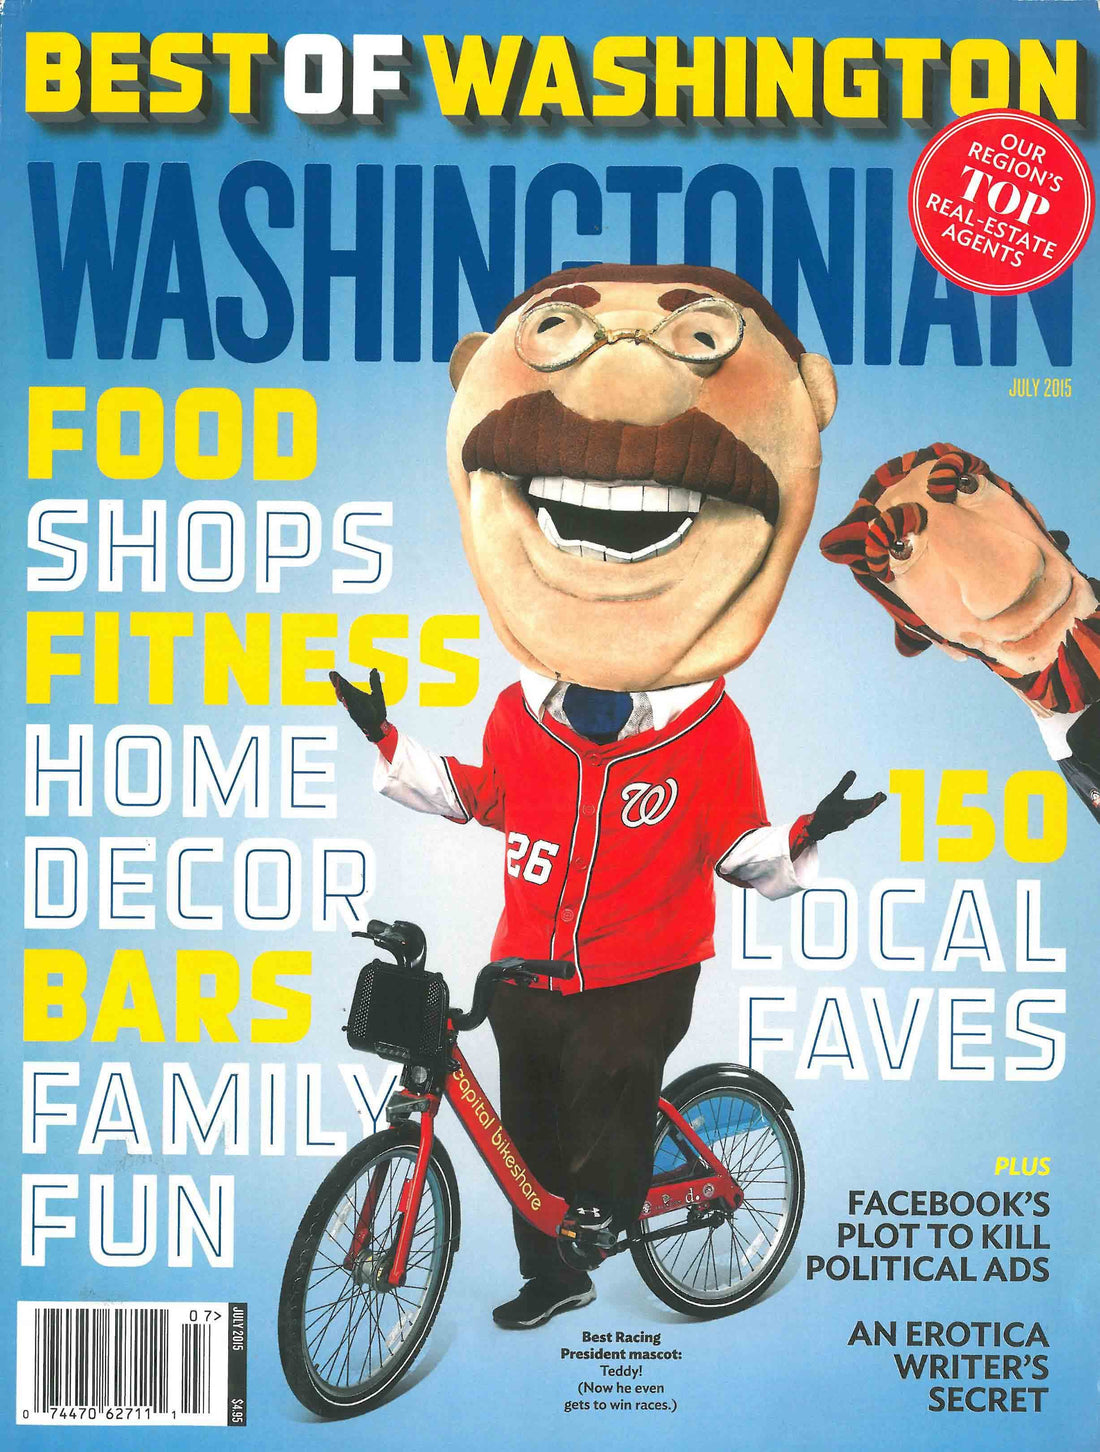 WASHINGTONIAN featuring the PMD